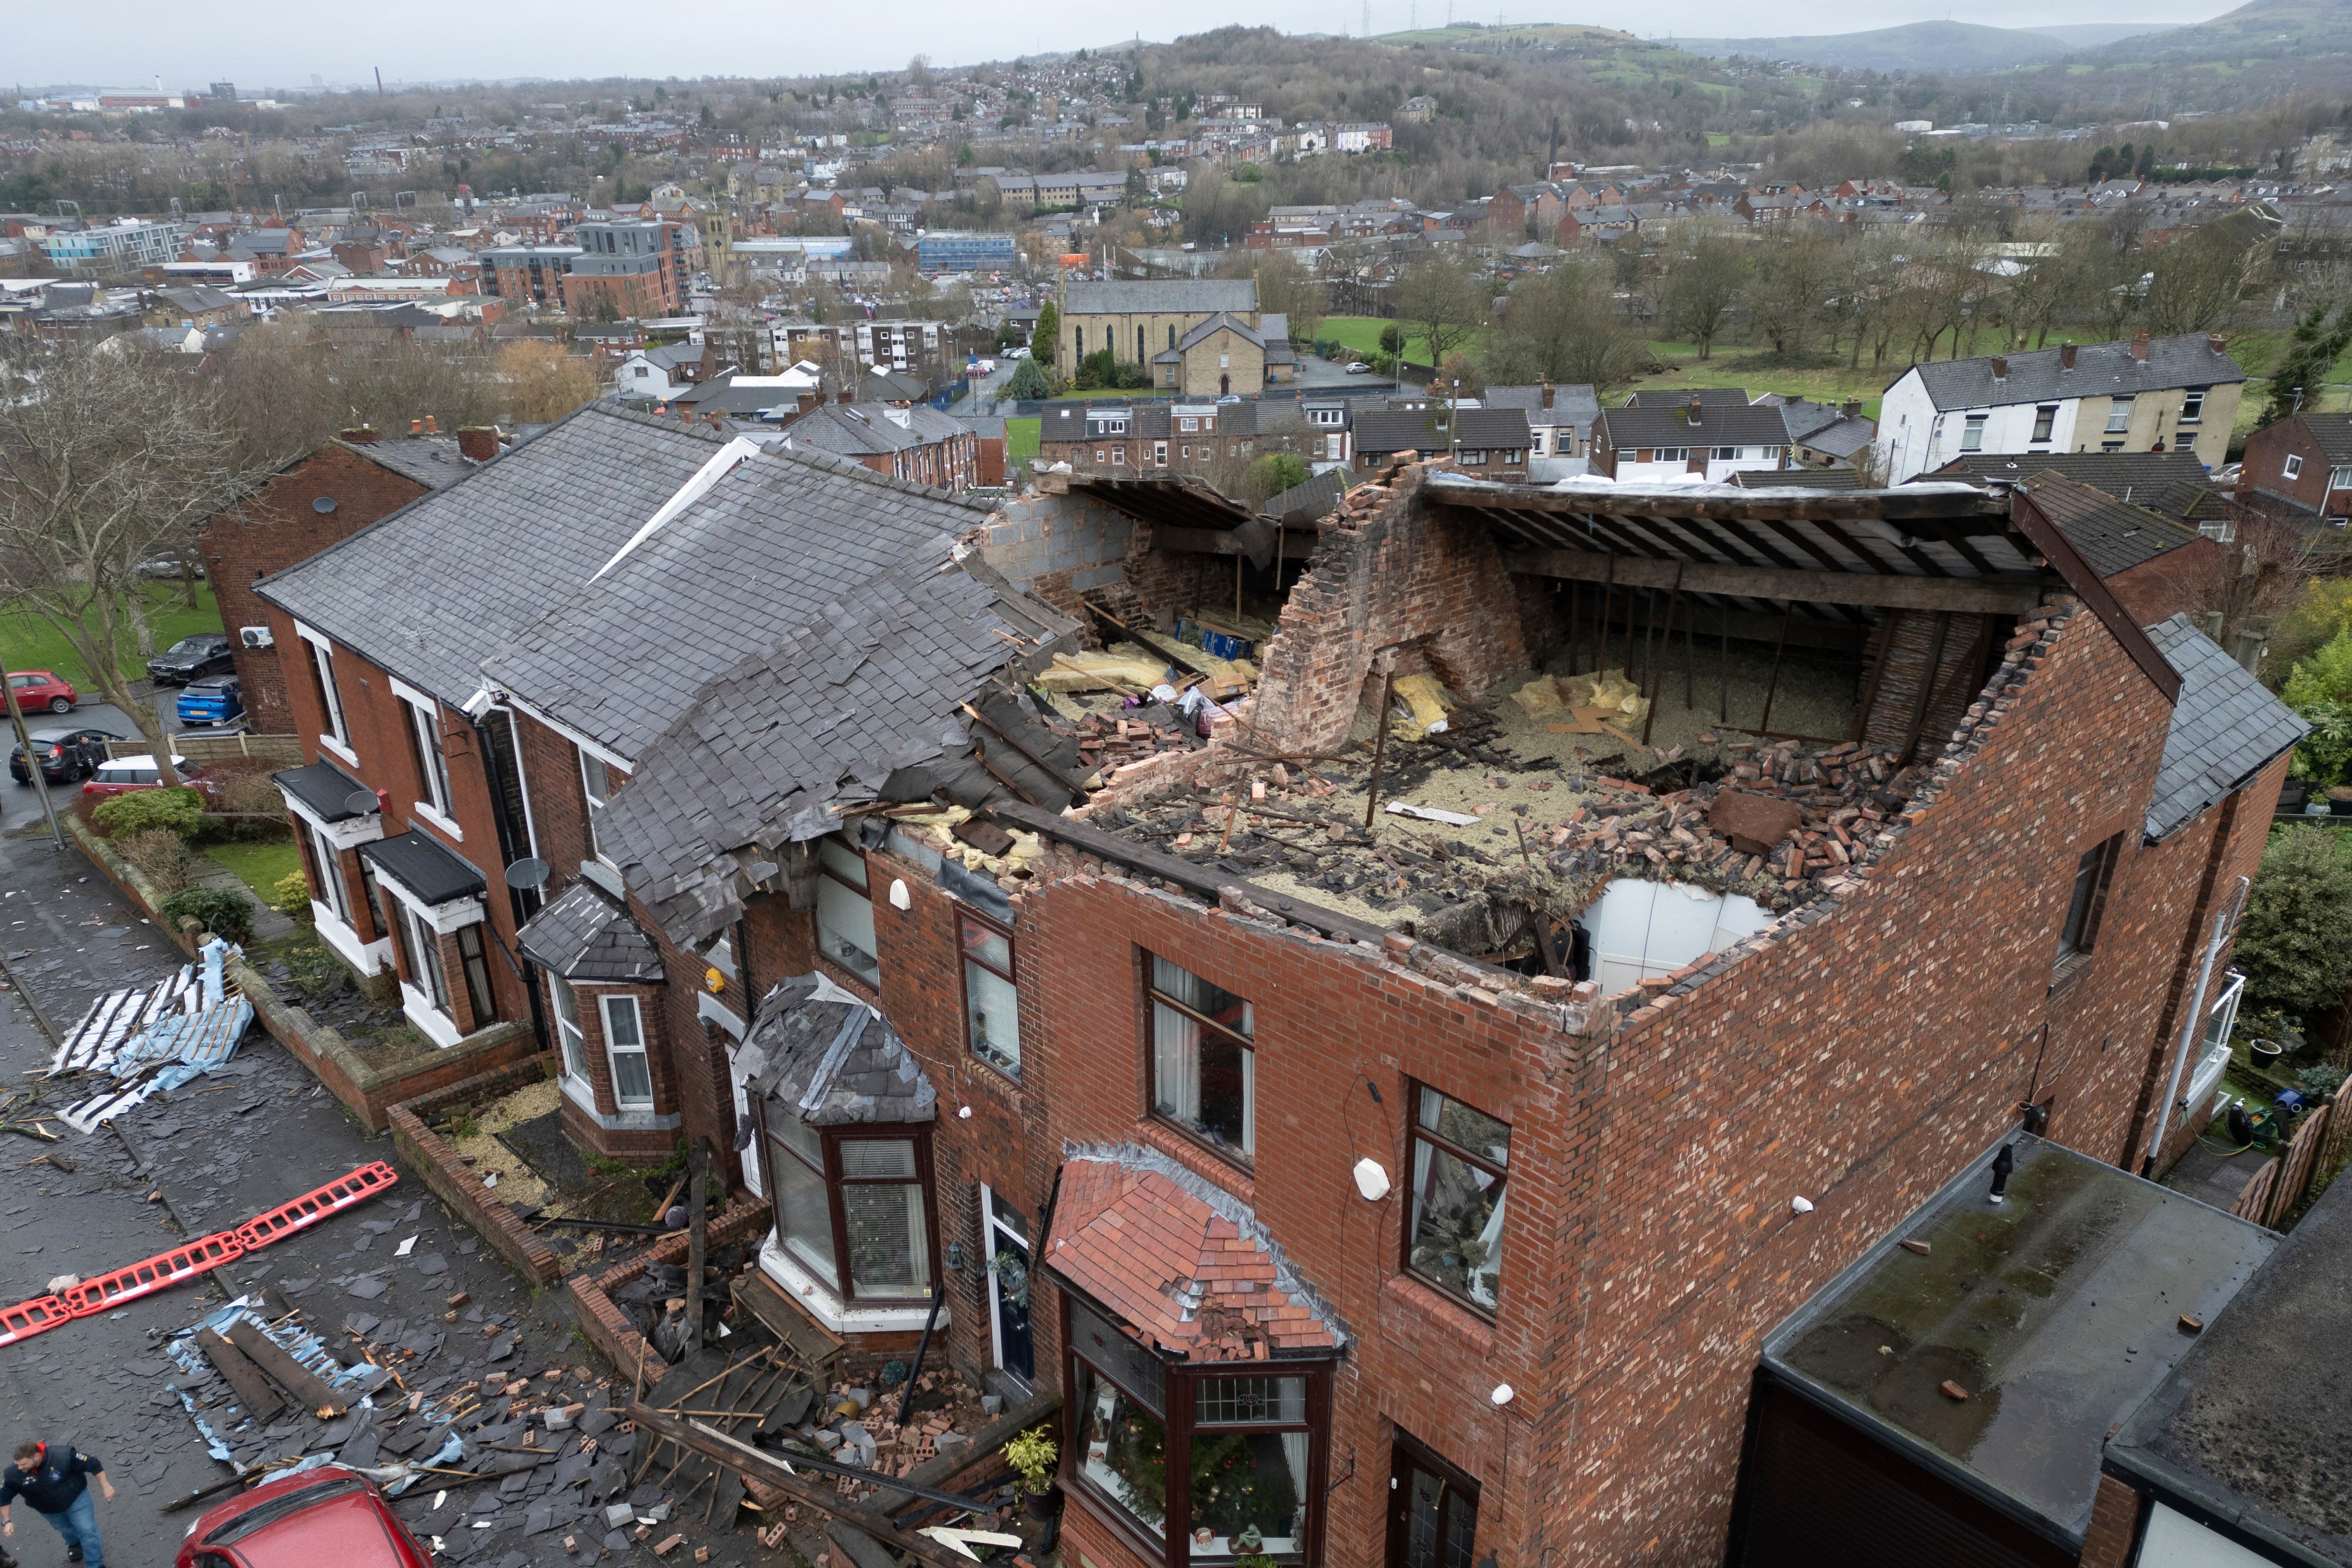 The ‘localised tornado’ ripped off roofs and brought down walls in Storm Gerrit (AP Photo/Jon Super)